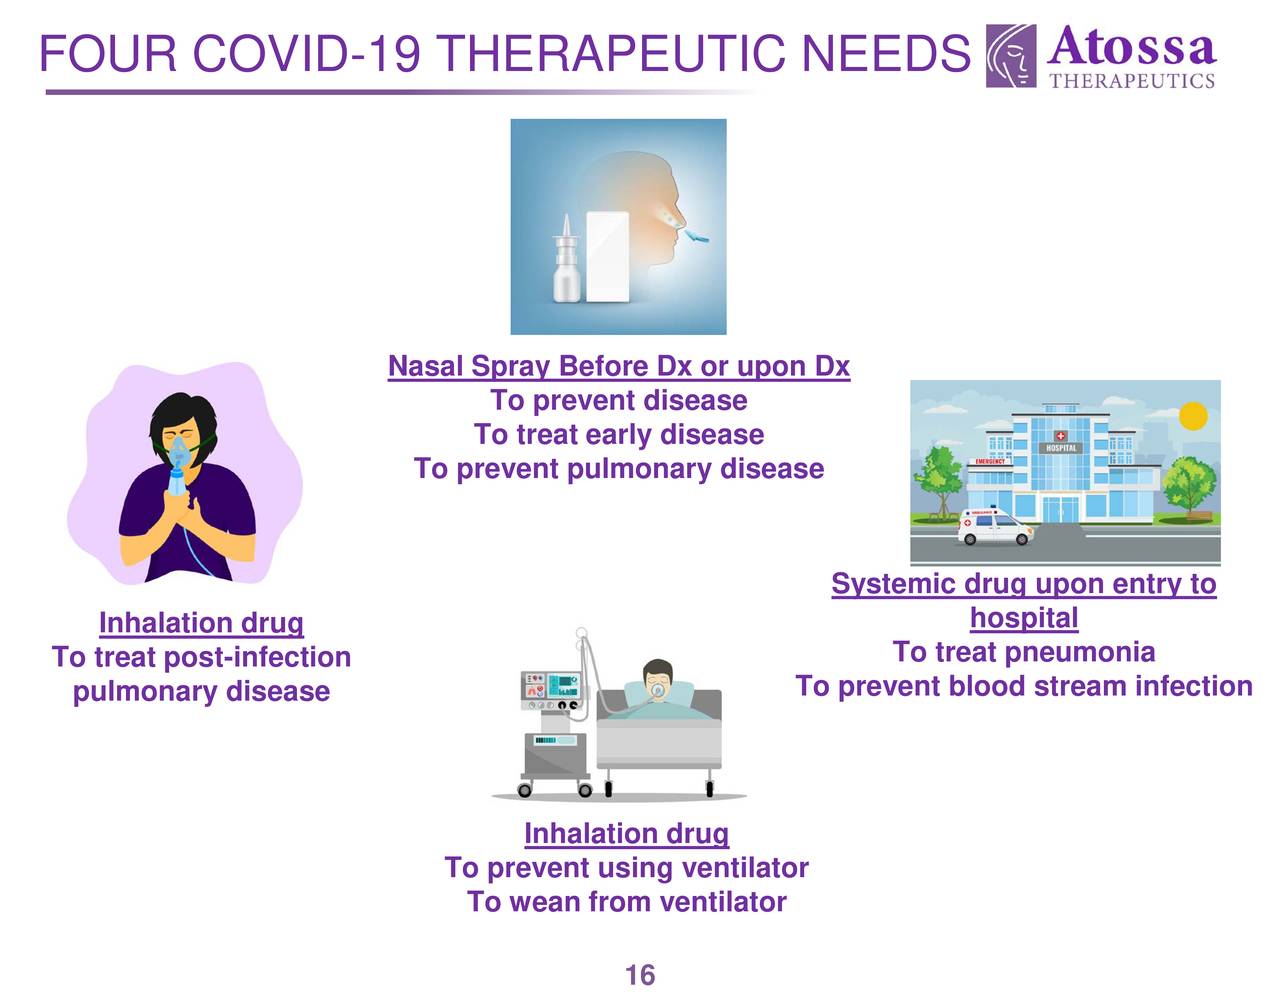 FOUR COVID-19 THERAPEUTIC NEEDS